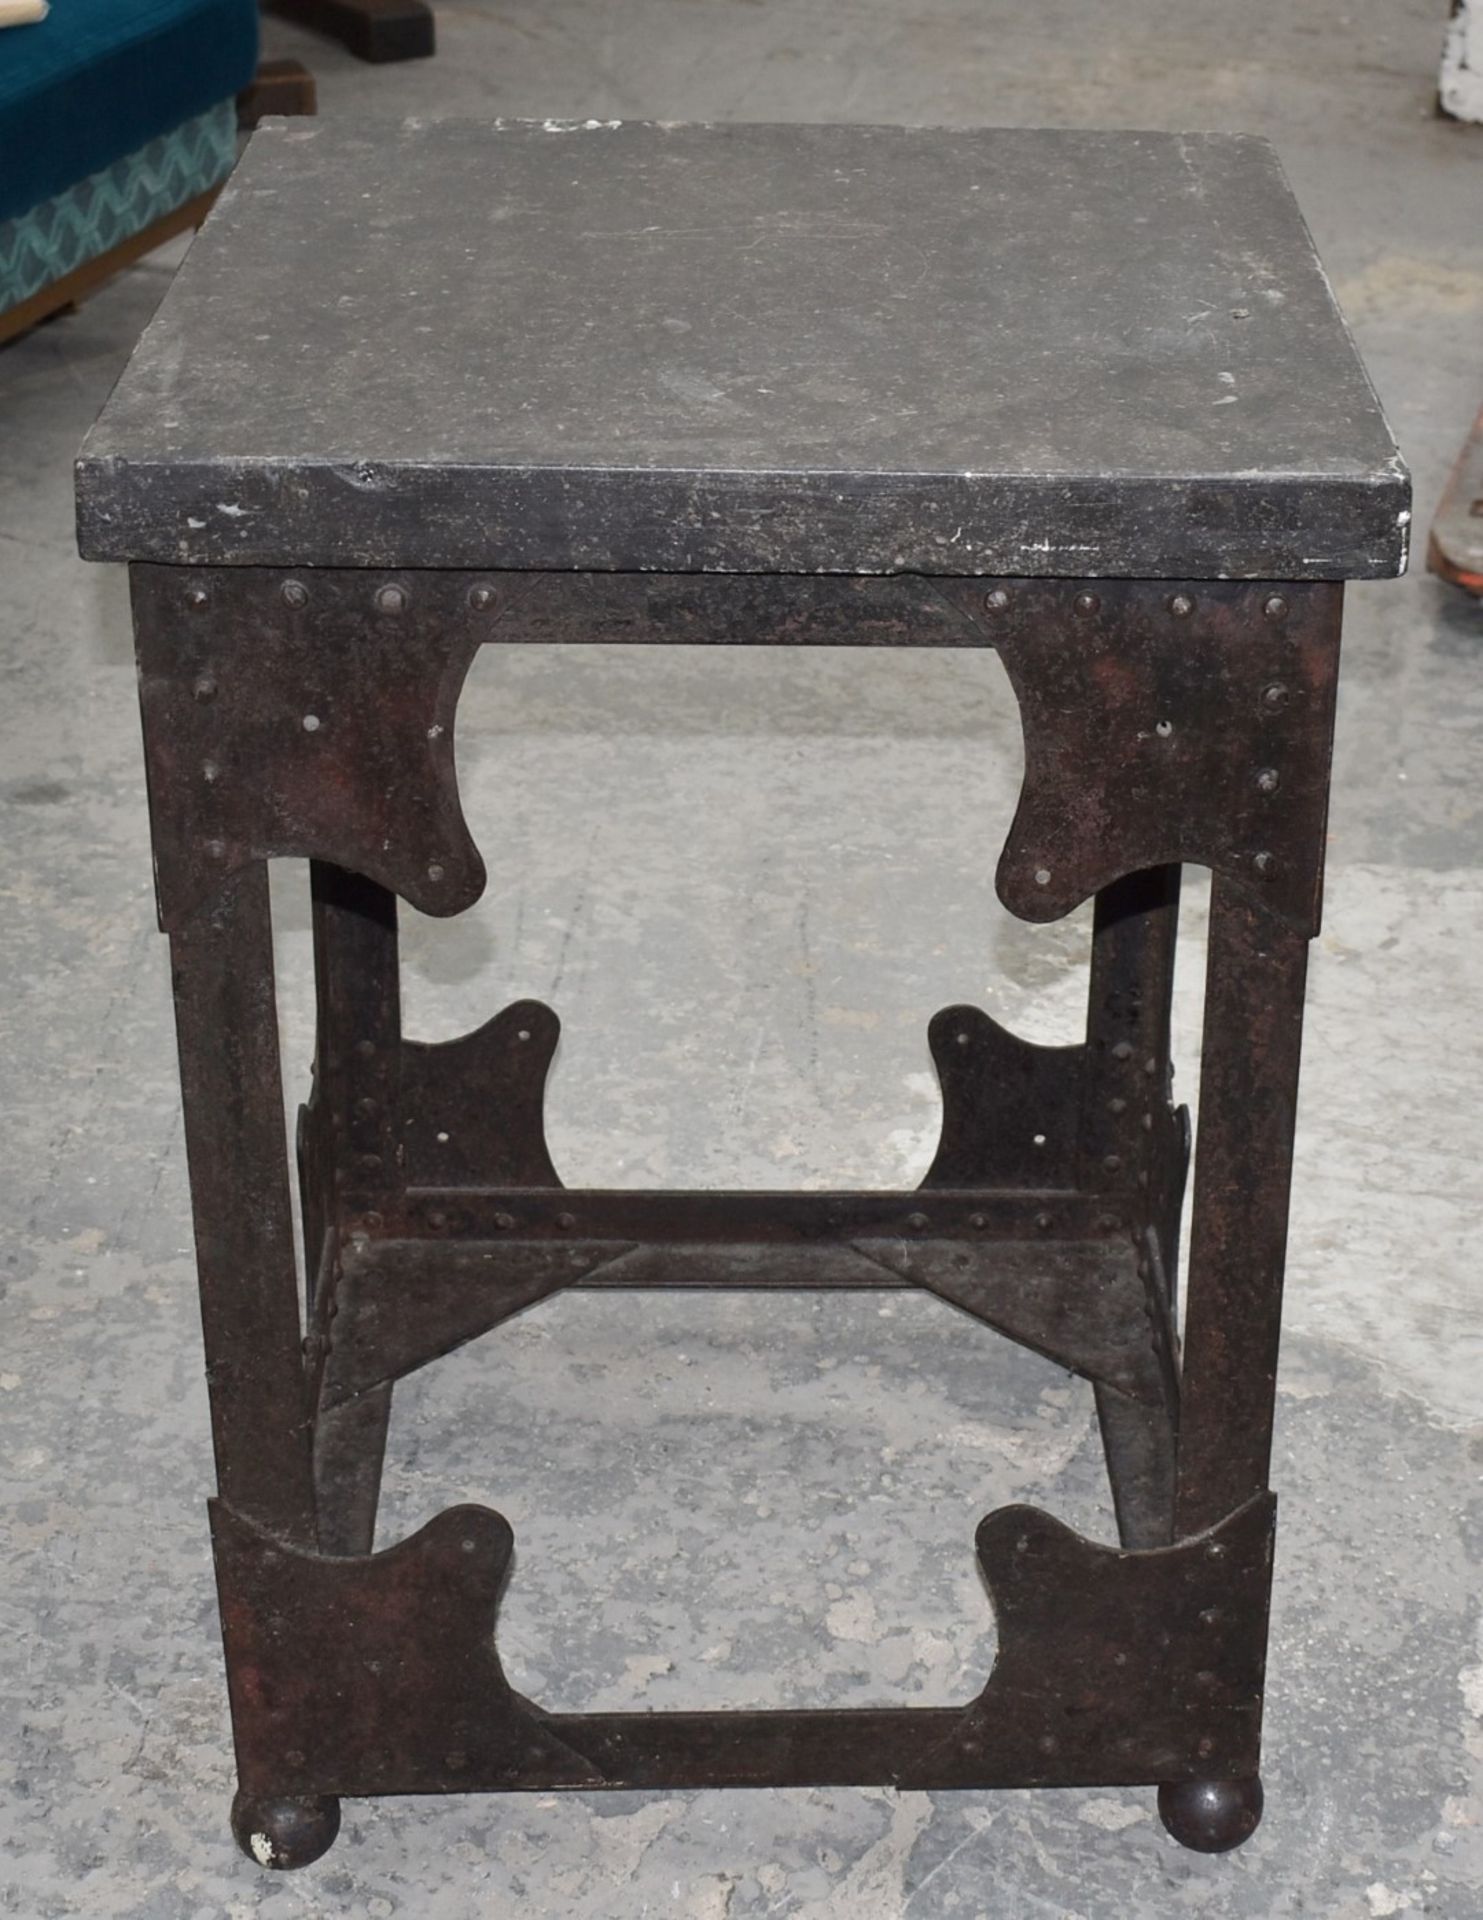 1 x Vintage Butchers Block With Riveted Steel Base, Utensil Hanging Rail and Heavy Stone Block Top - Image 11 of 11